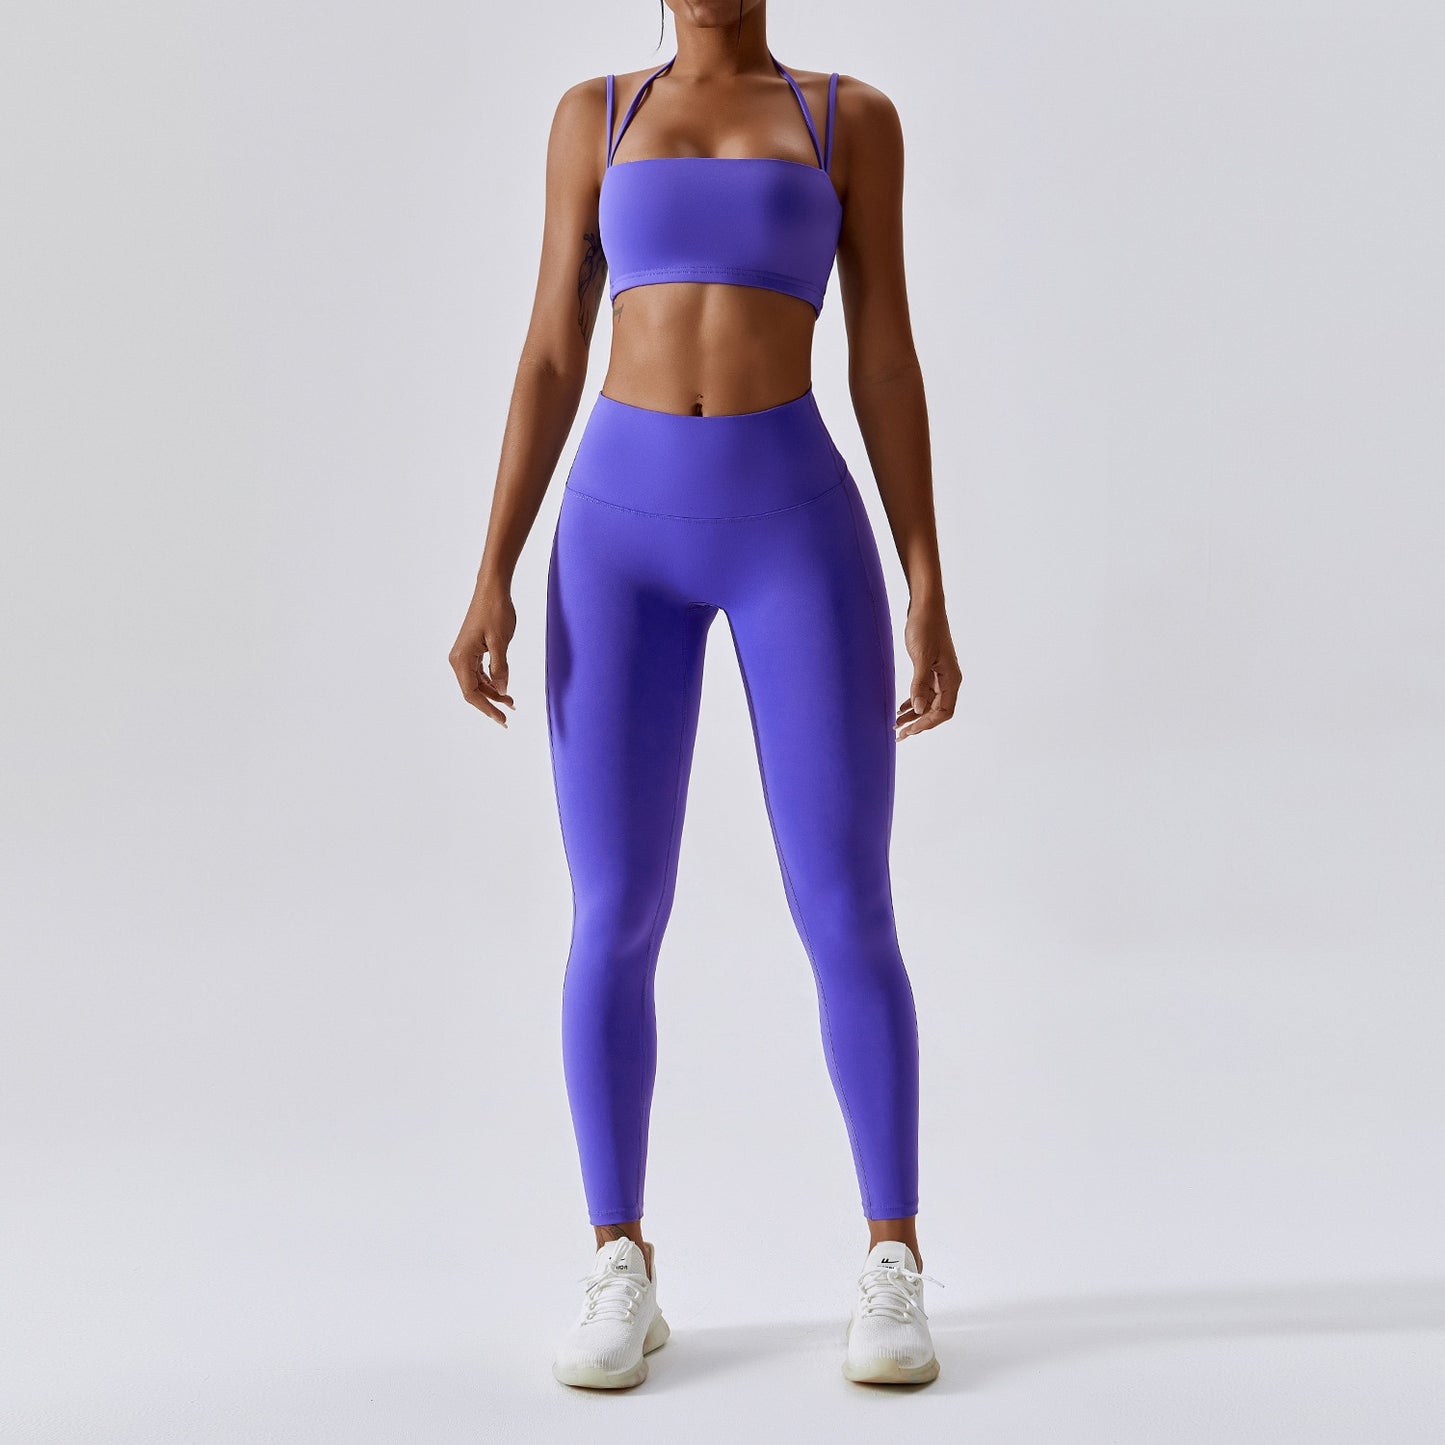 Yoga Clothing Sets Athletic Wear Women High Waist Leggings And Top Two Piece Set Seamless Gym Tracksuit Fitness Workout Outfits - Bonnie Lassio